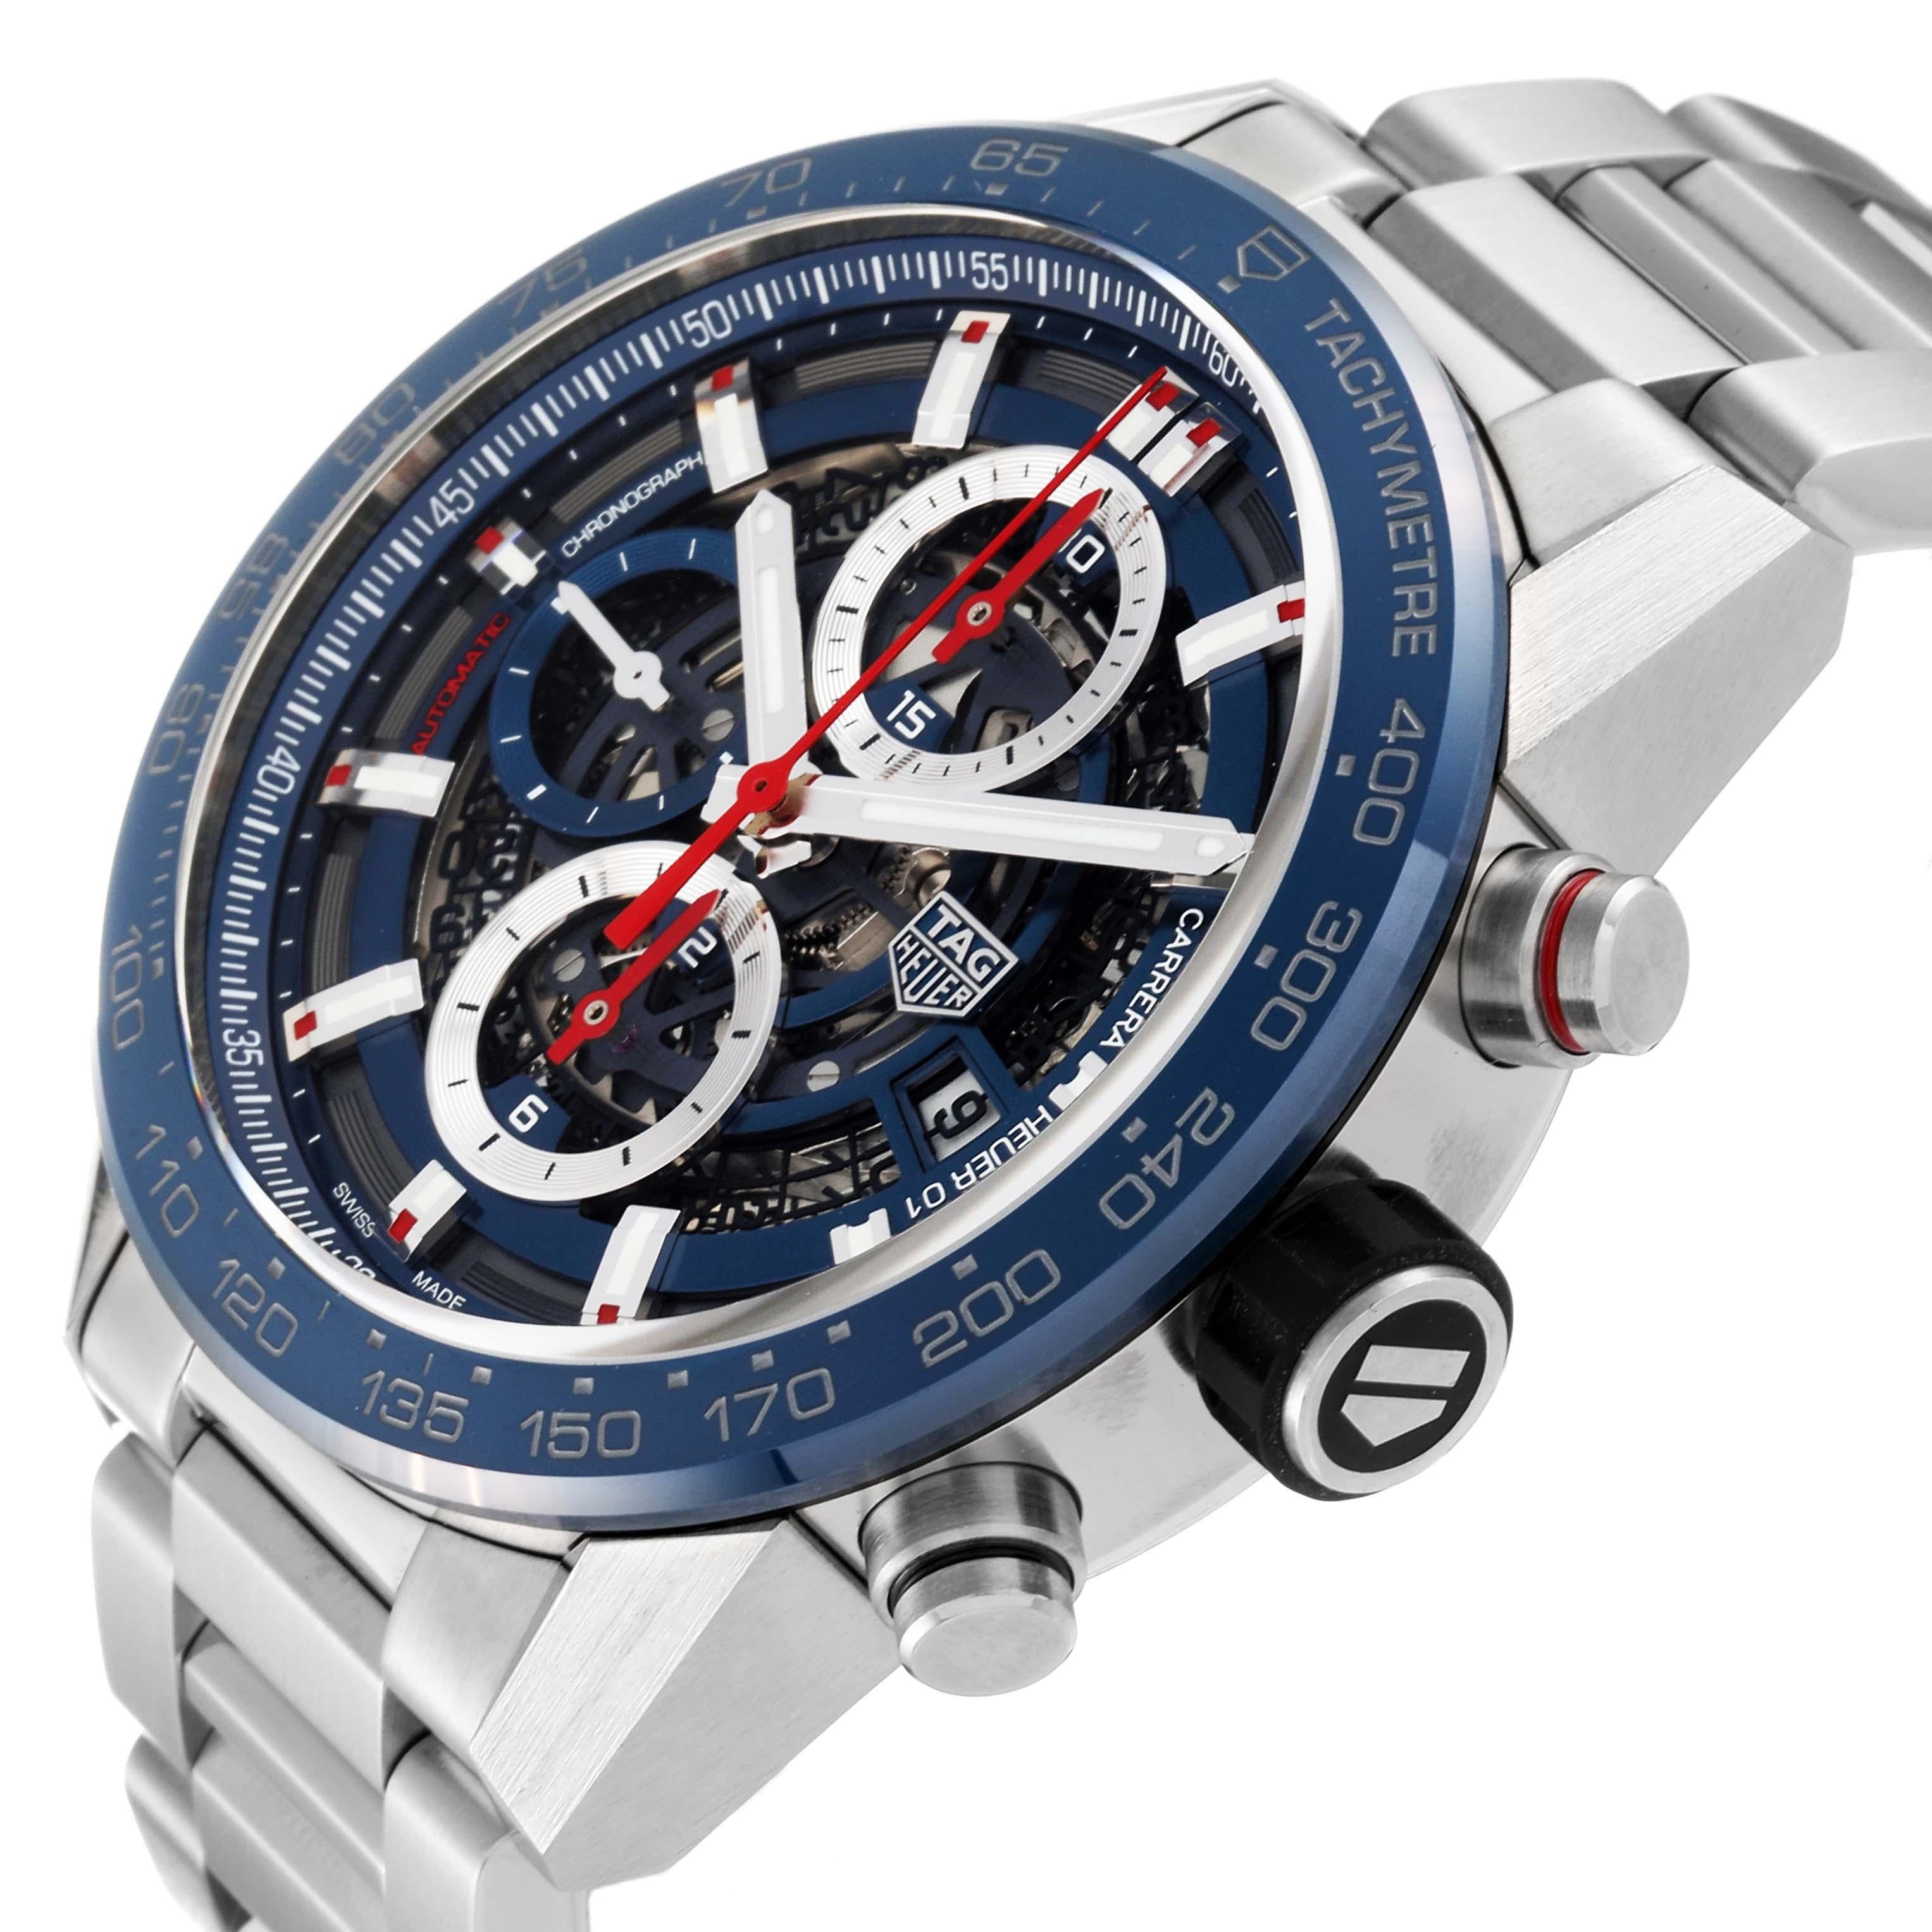 Tag Heuer Carrera Blue Skeleton Dial Chronograph Steel Mens Watch CAR201T For Sale 1